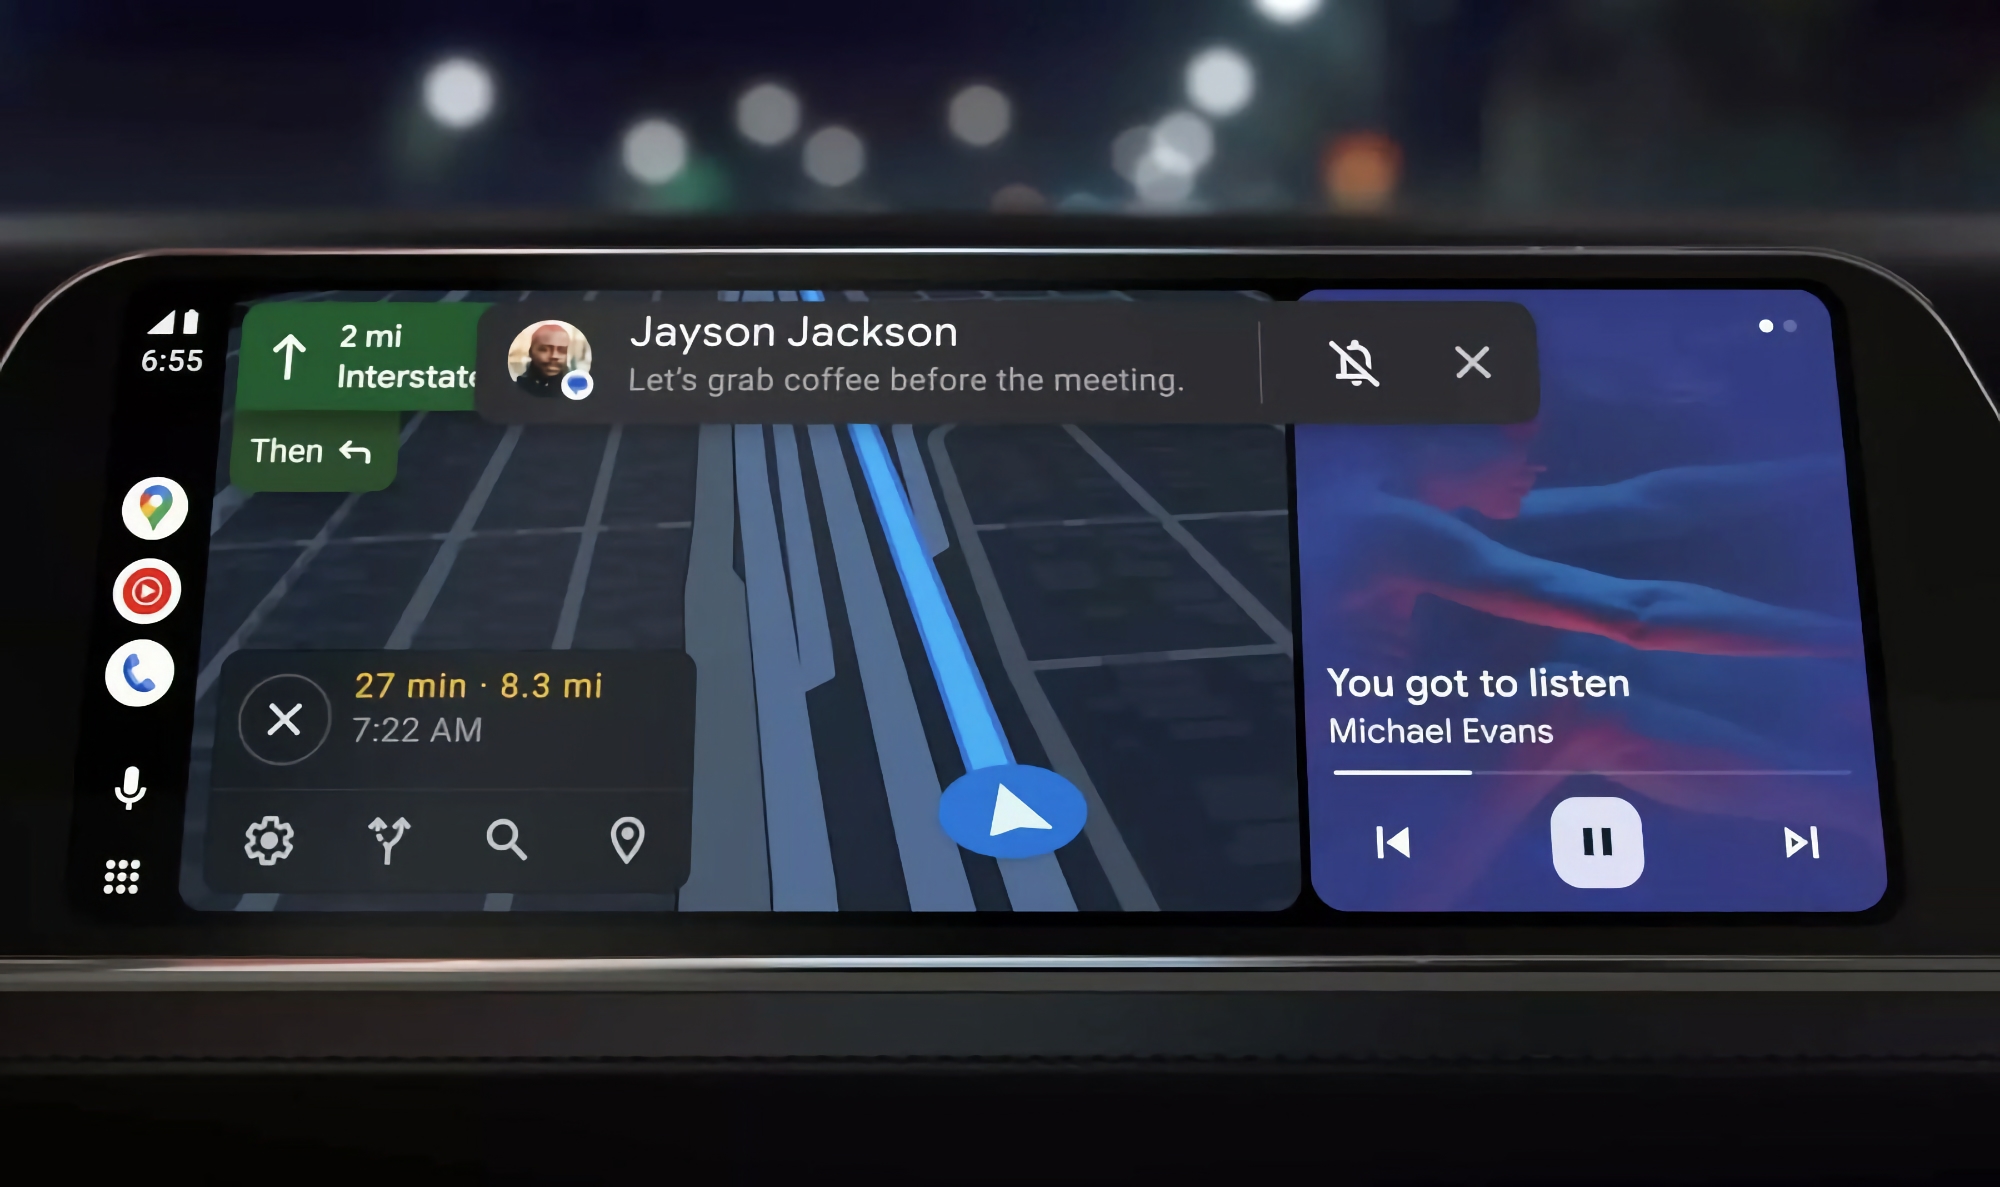 Google Just Made Android Auto Smarter And Safer With New AI Skills